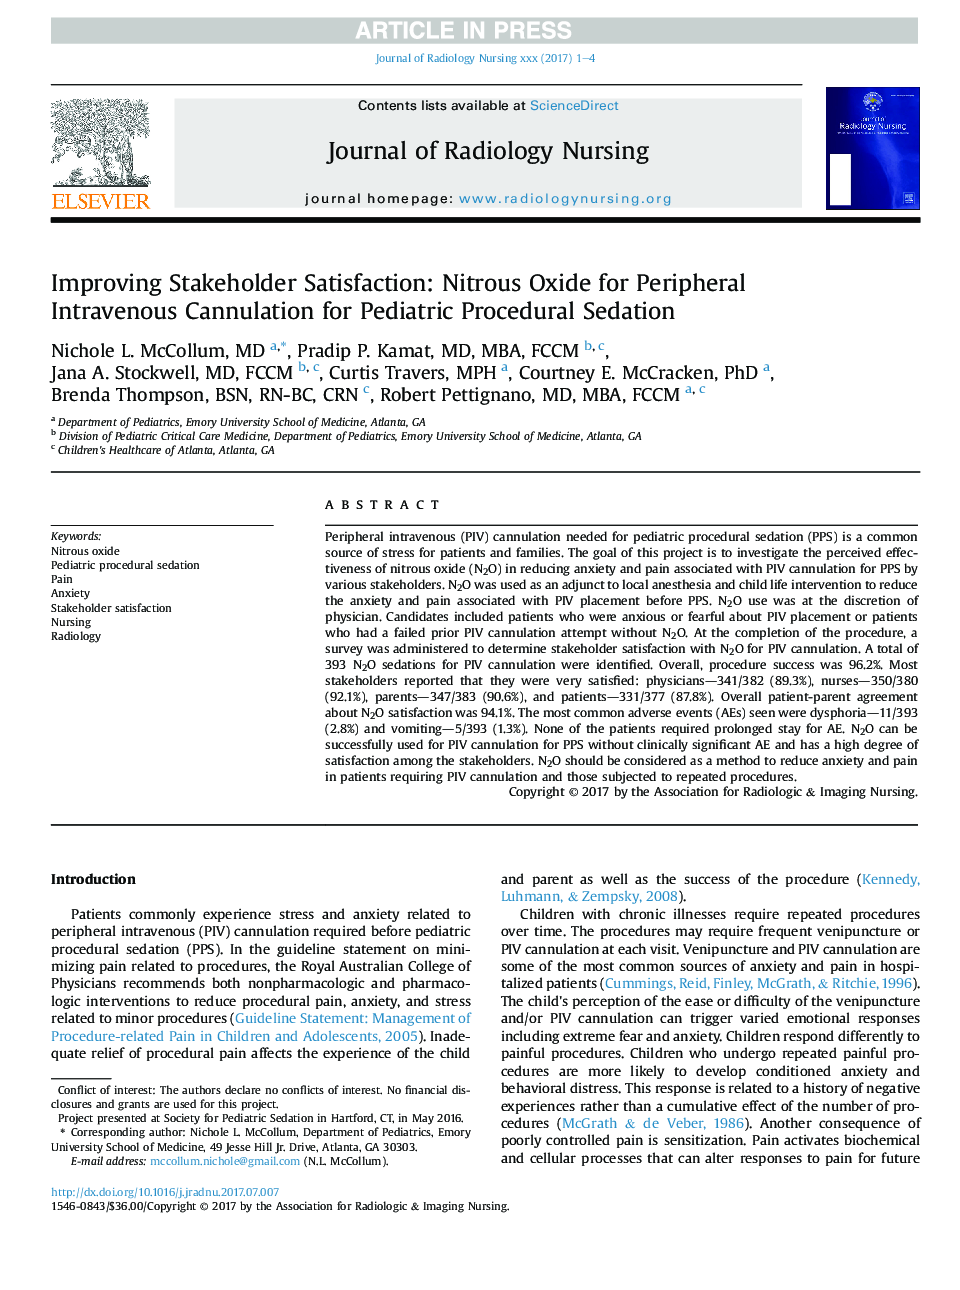 Improving Stakeholder Satisfaction: Nitrous Oxide for Peripheral Intravenous Cannulation for Pediatric Procedural Sedation